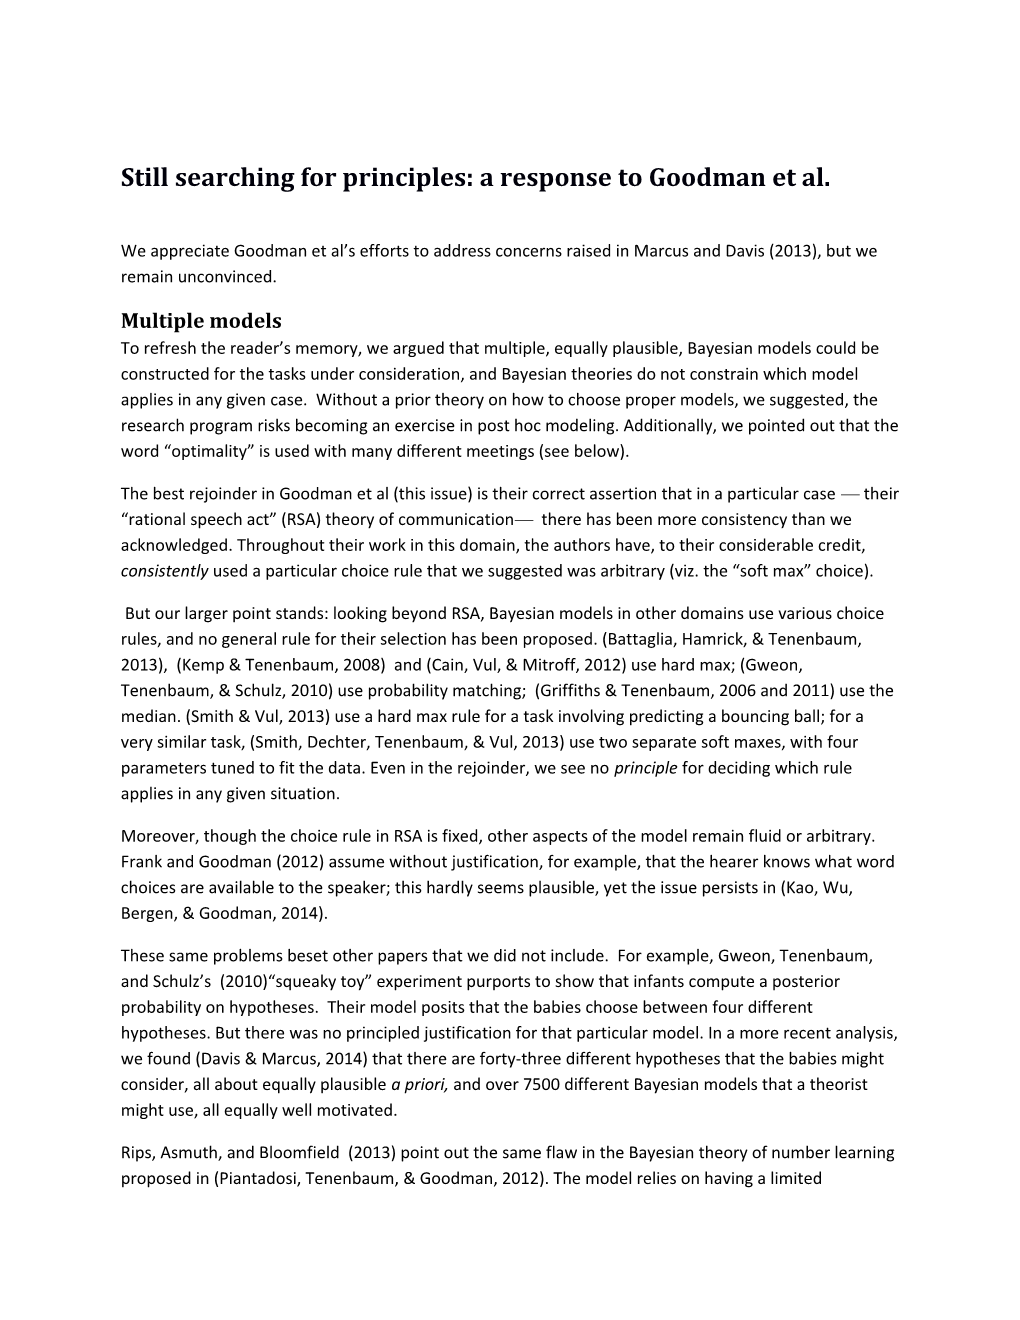 Still Searching for Principles: a Response to Goodman Et Al